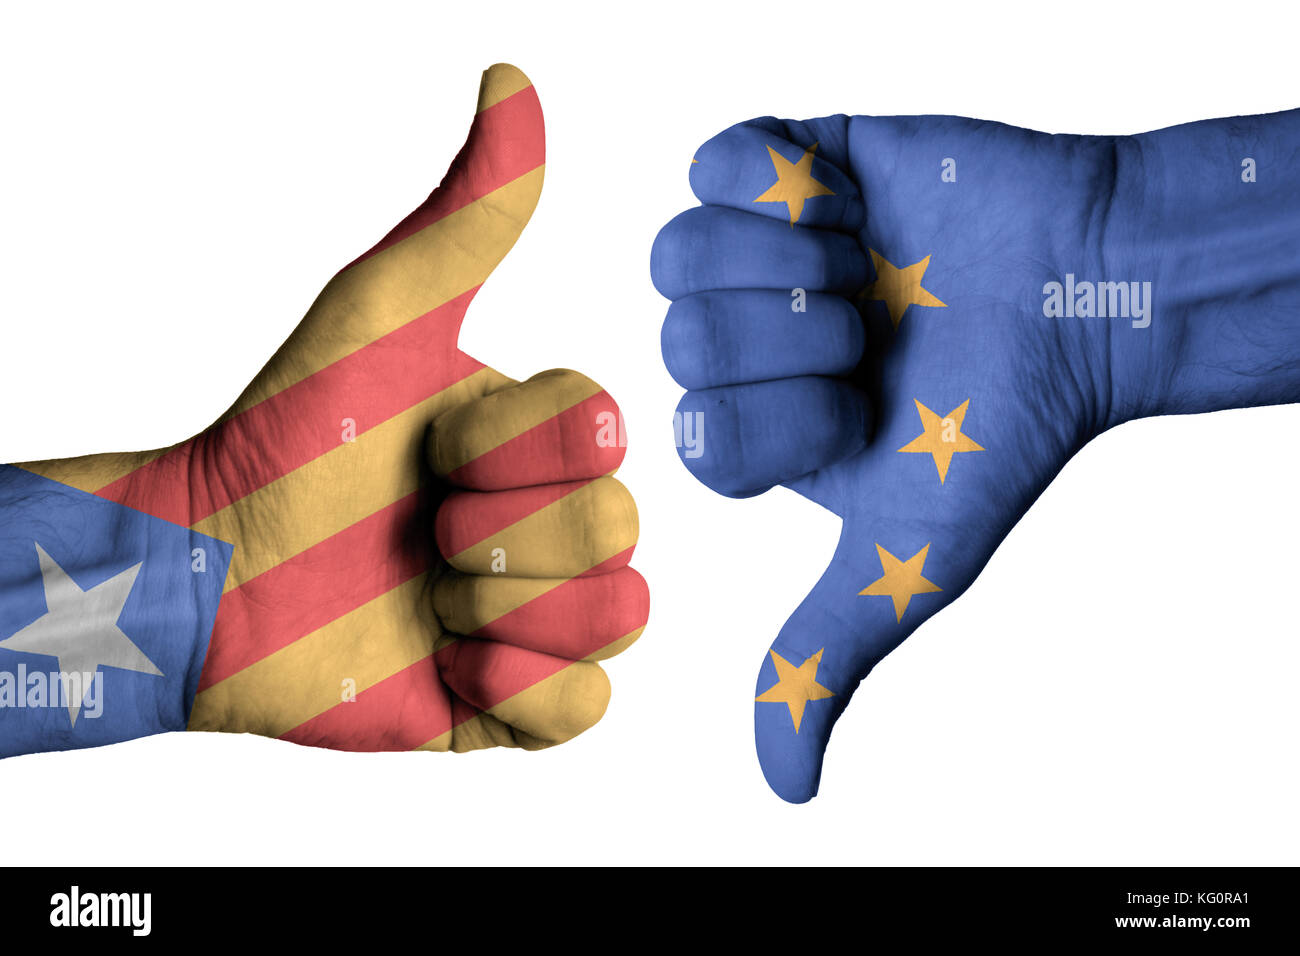 Catalonia and Europe flag on human male thumb up and down hands Stock Photo